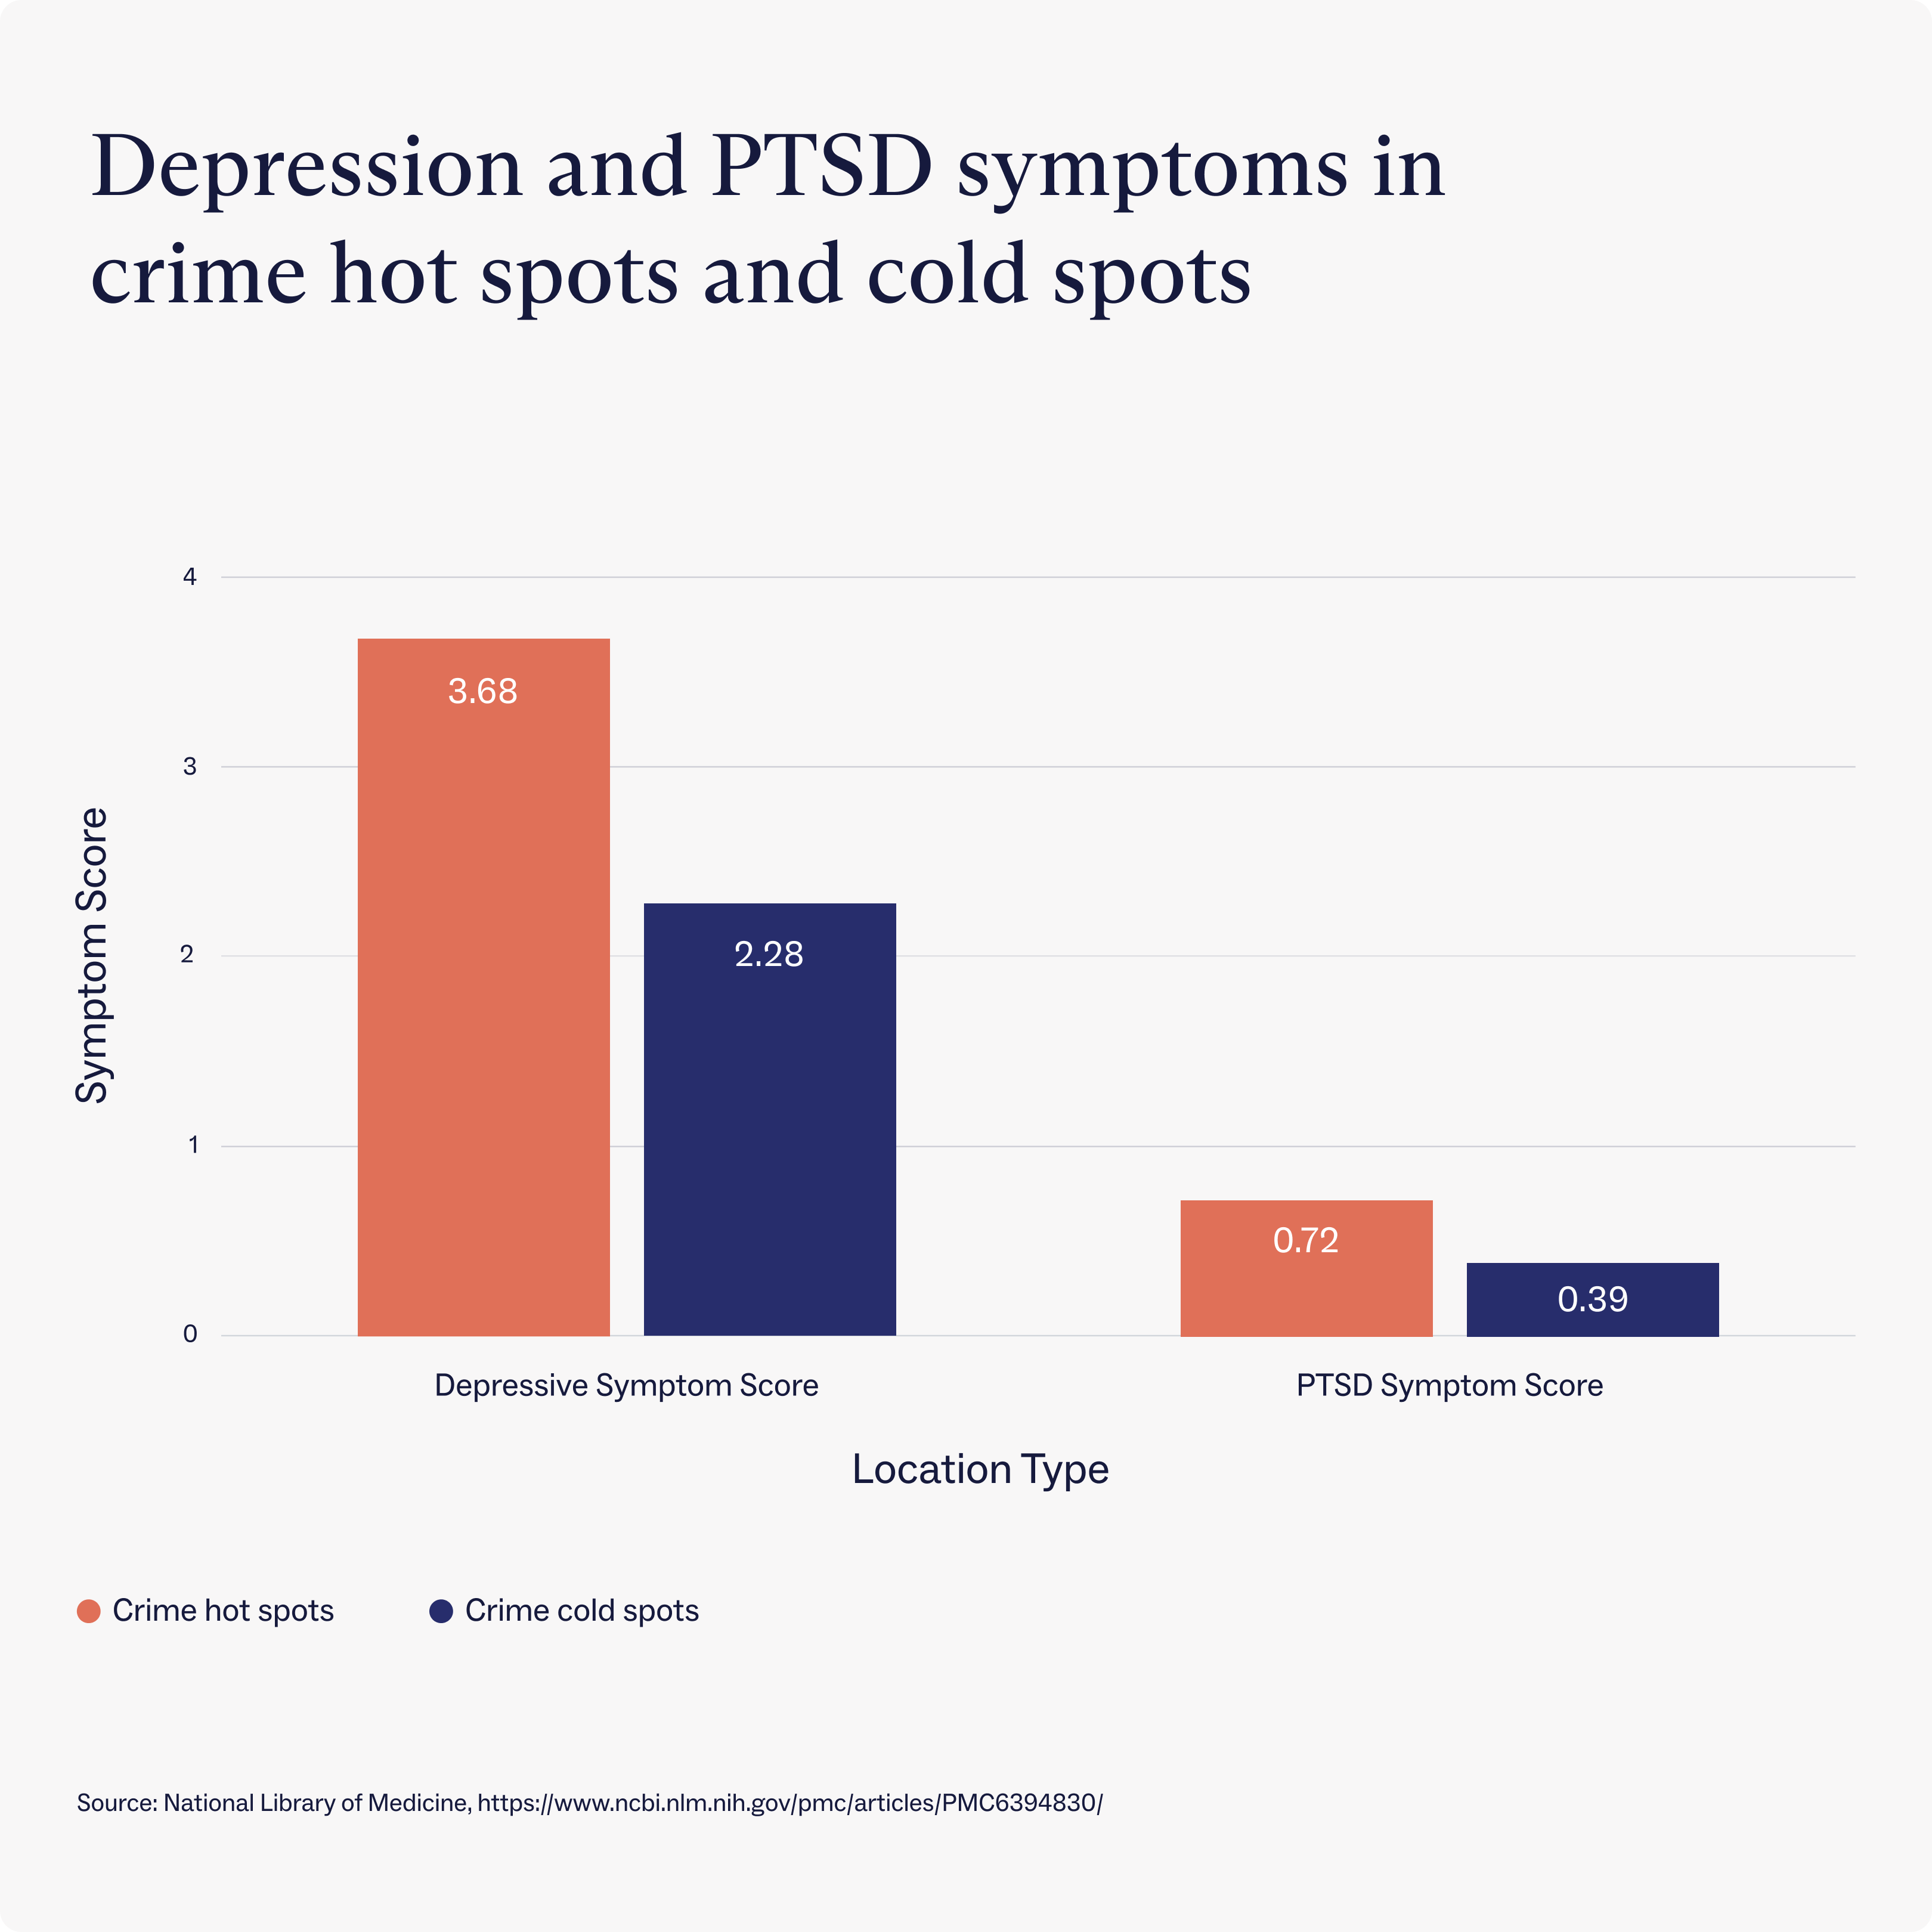 Chart showing depression and PTSD symptoms in crime spots.